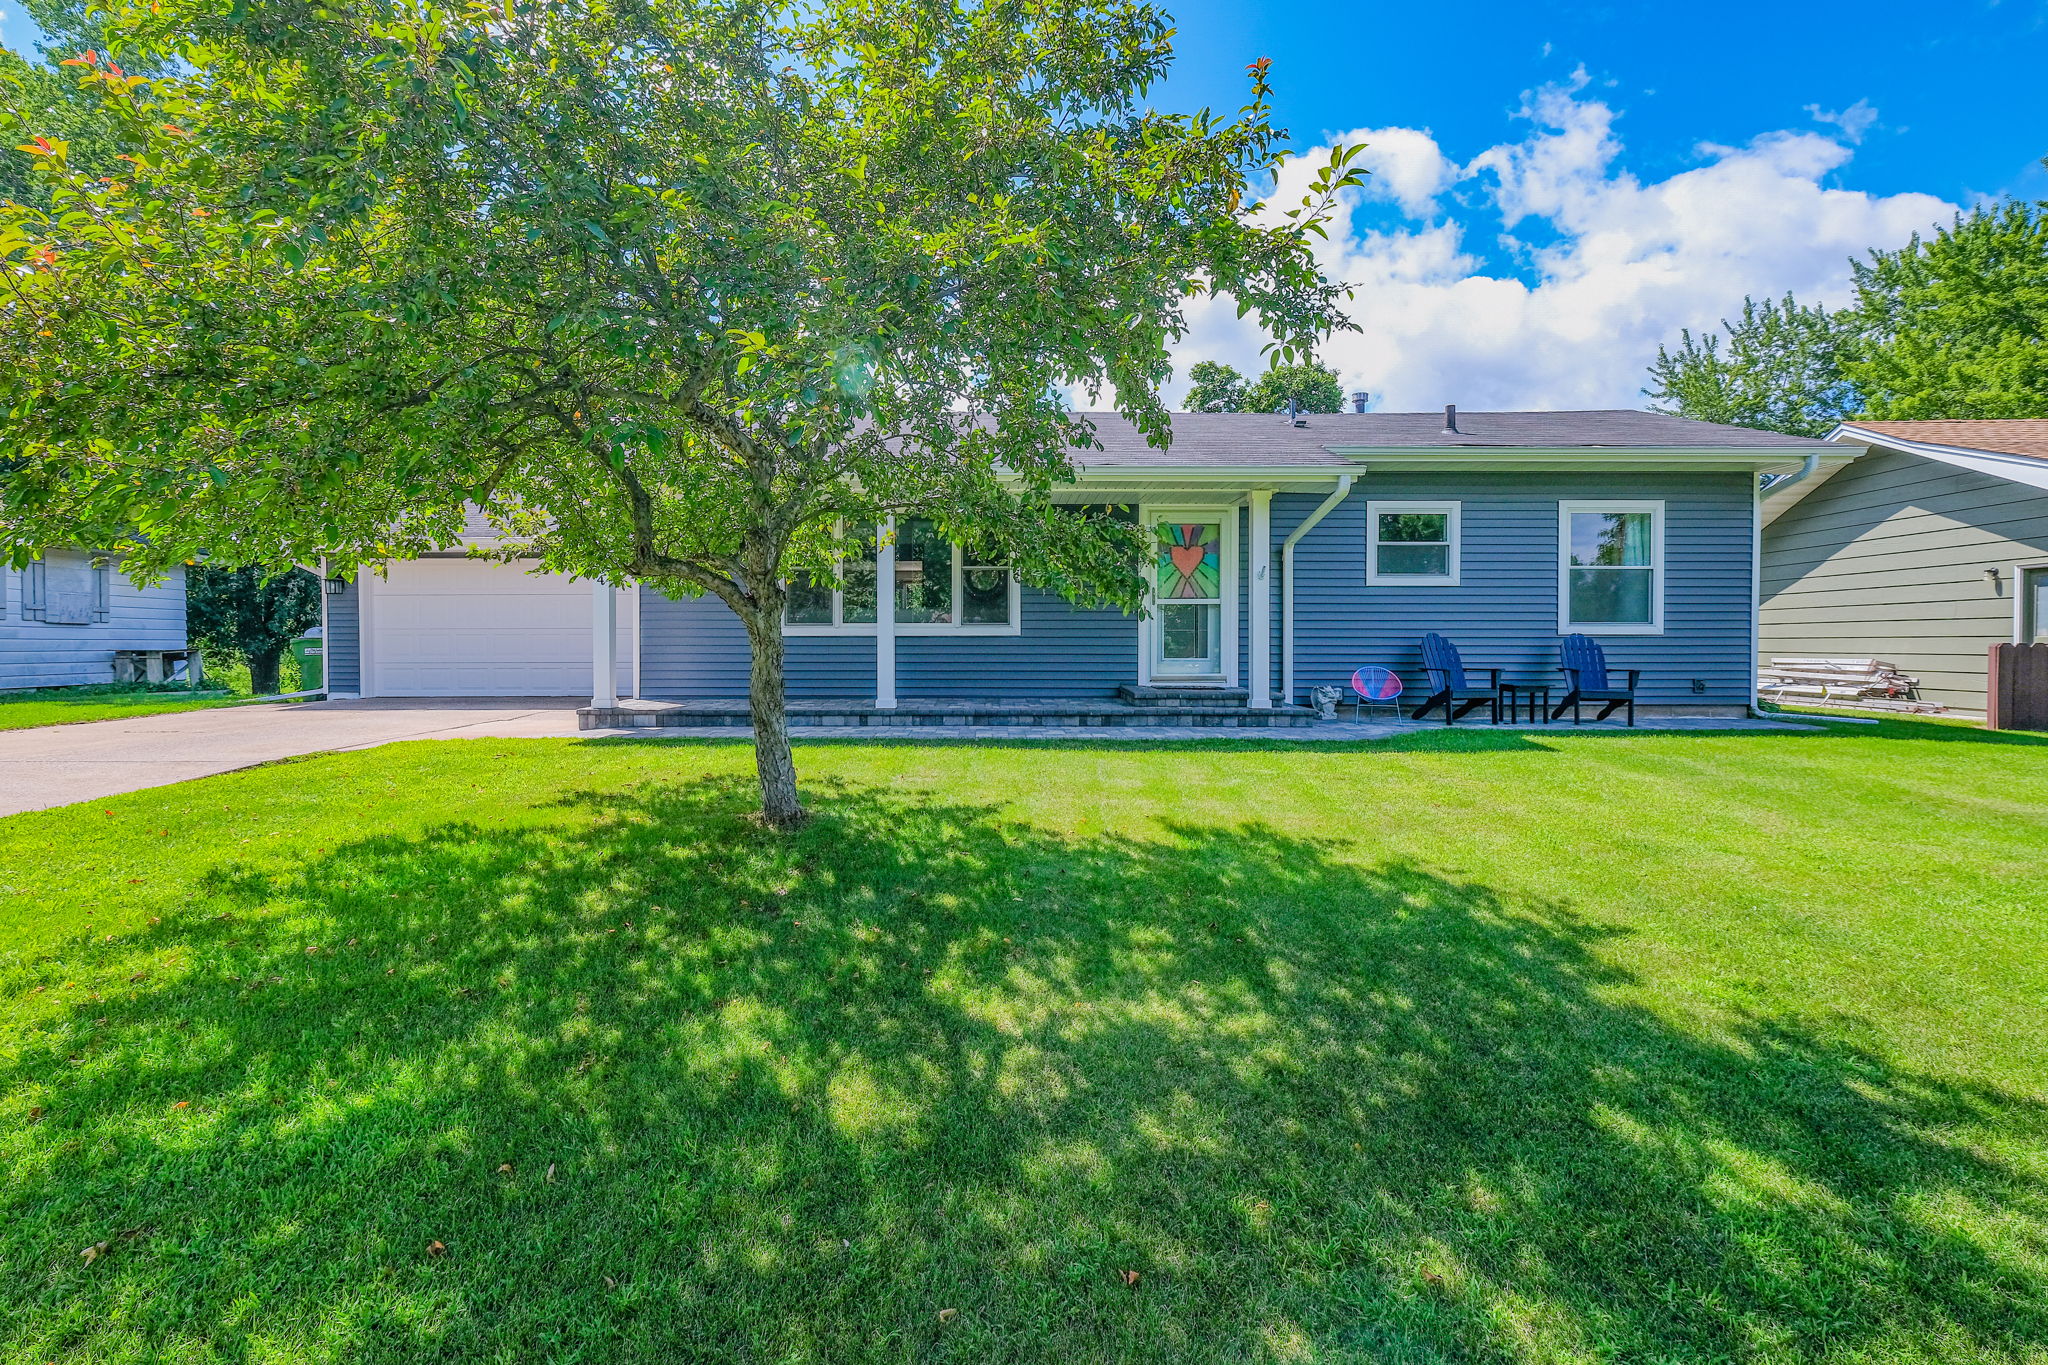  11924 Zion St NW, Coon Rapids, MN 55433, US